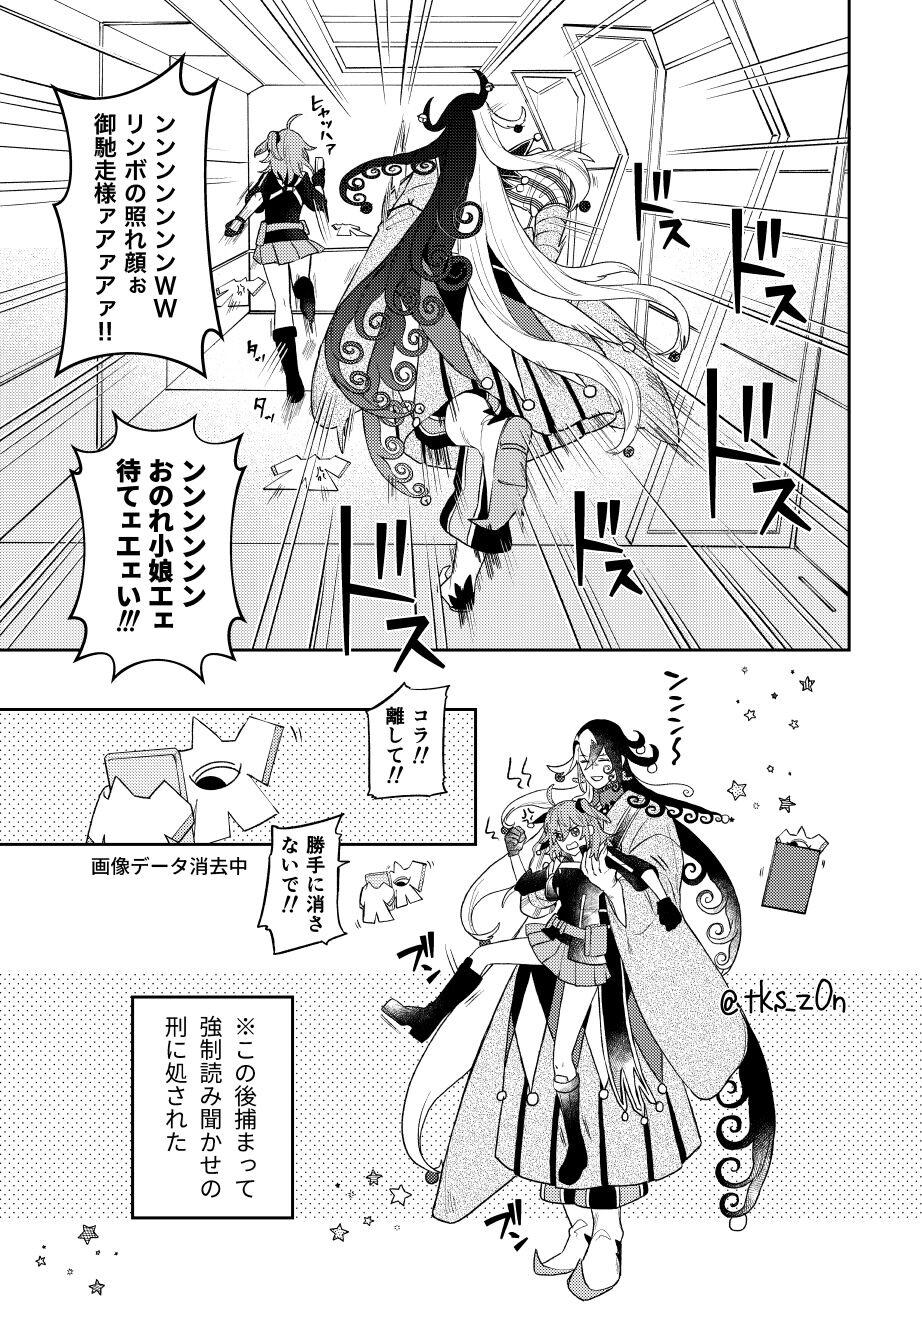 Young Old ][Rin guda ♀ matome[ fate grand order ) - Fate grand order Highheels - Page 11